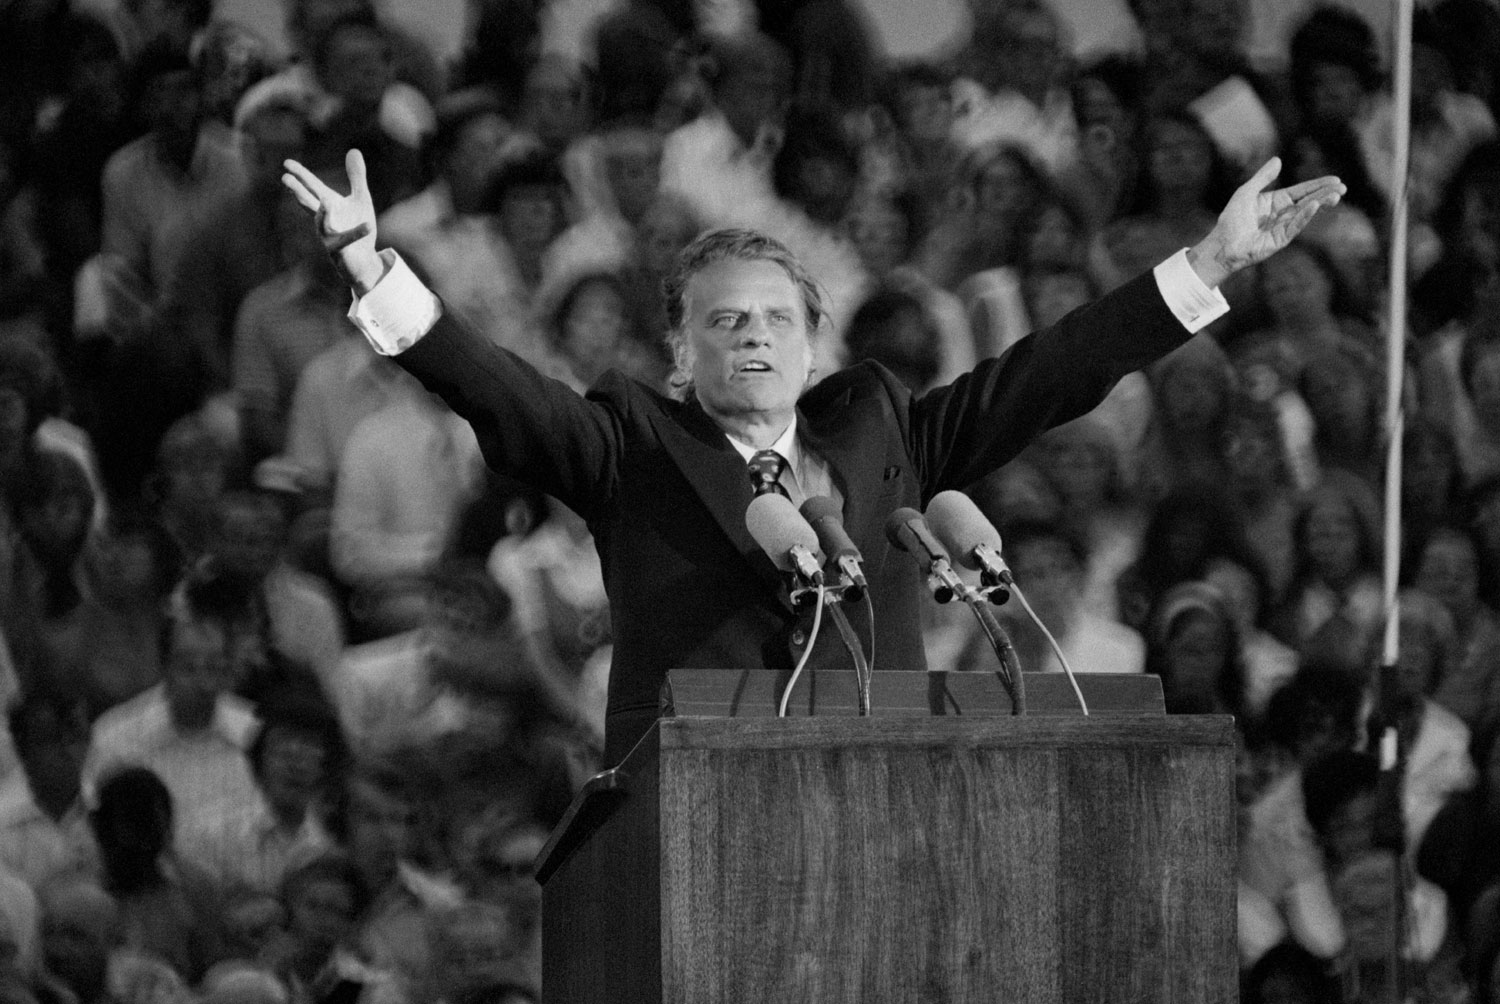 Graham preaches to a crowd of 21,000 in St. Paul, Minnesota, about Judgment Day.